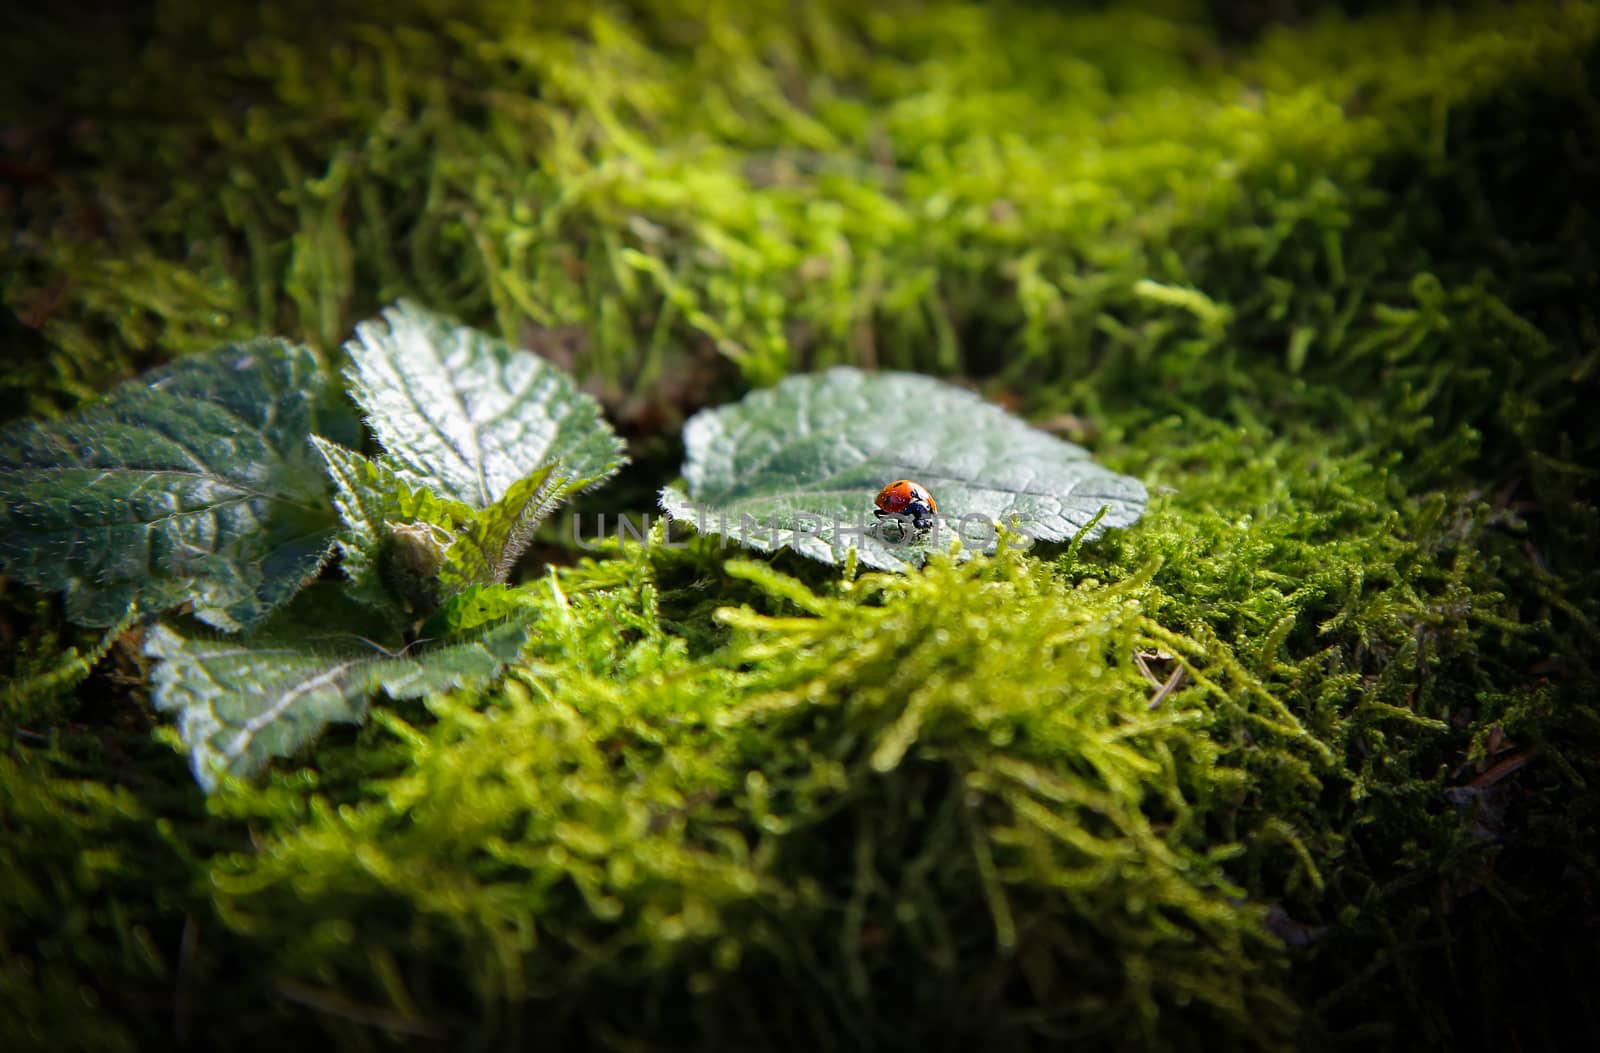 Insect ladybug sitting on a leaf on a stump covered with green moss by Mastak80